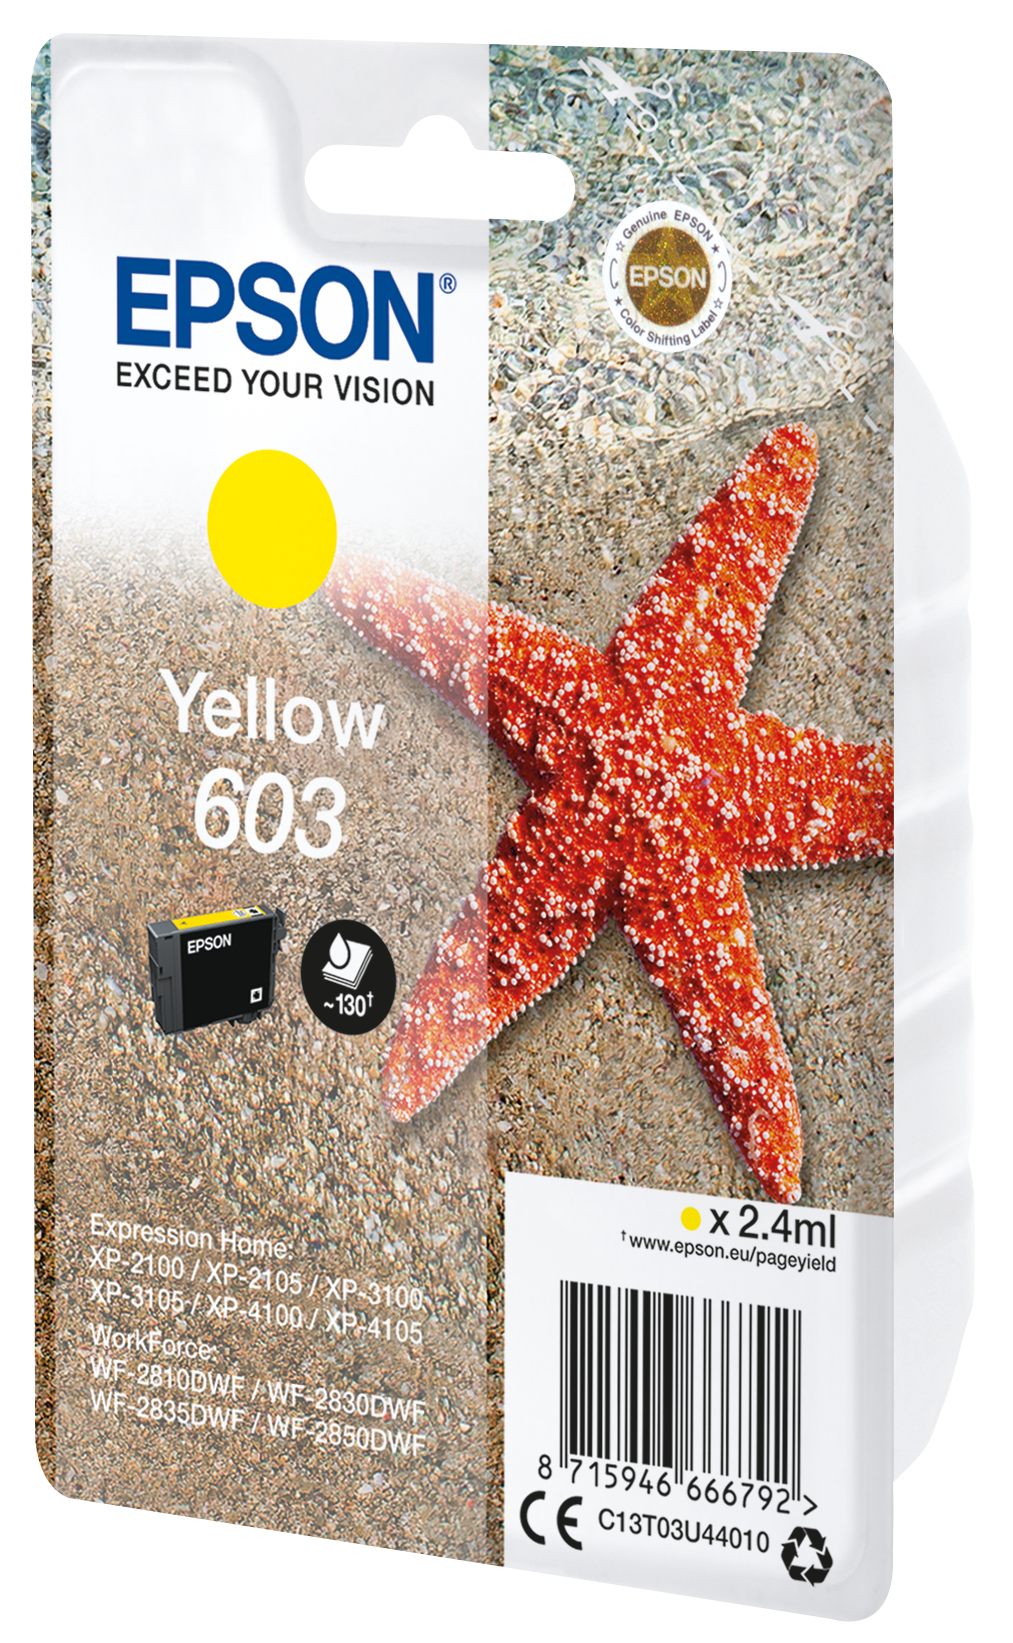 603 Starfish Single Yellow Ink, Ink Consumables, Ink & Paper, Products